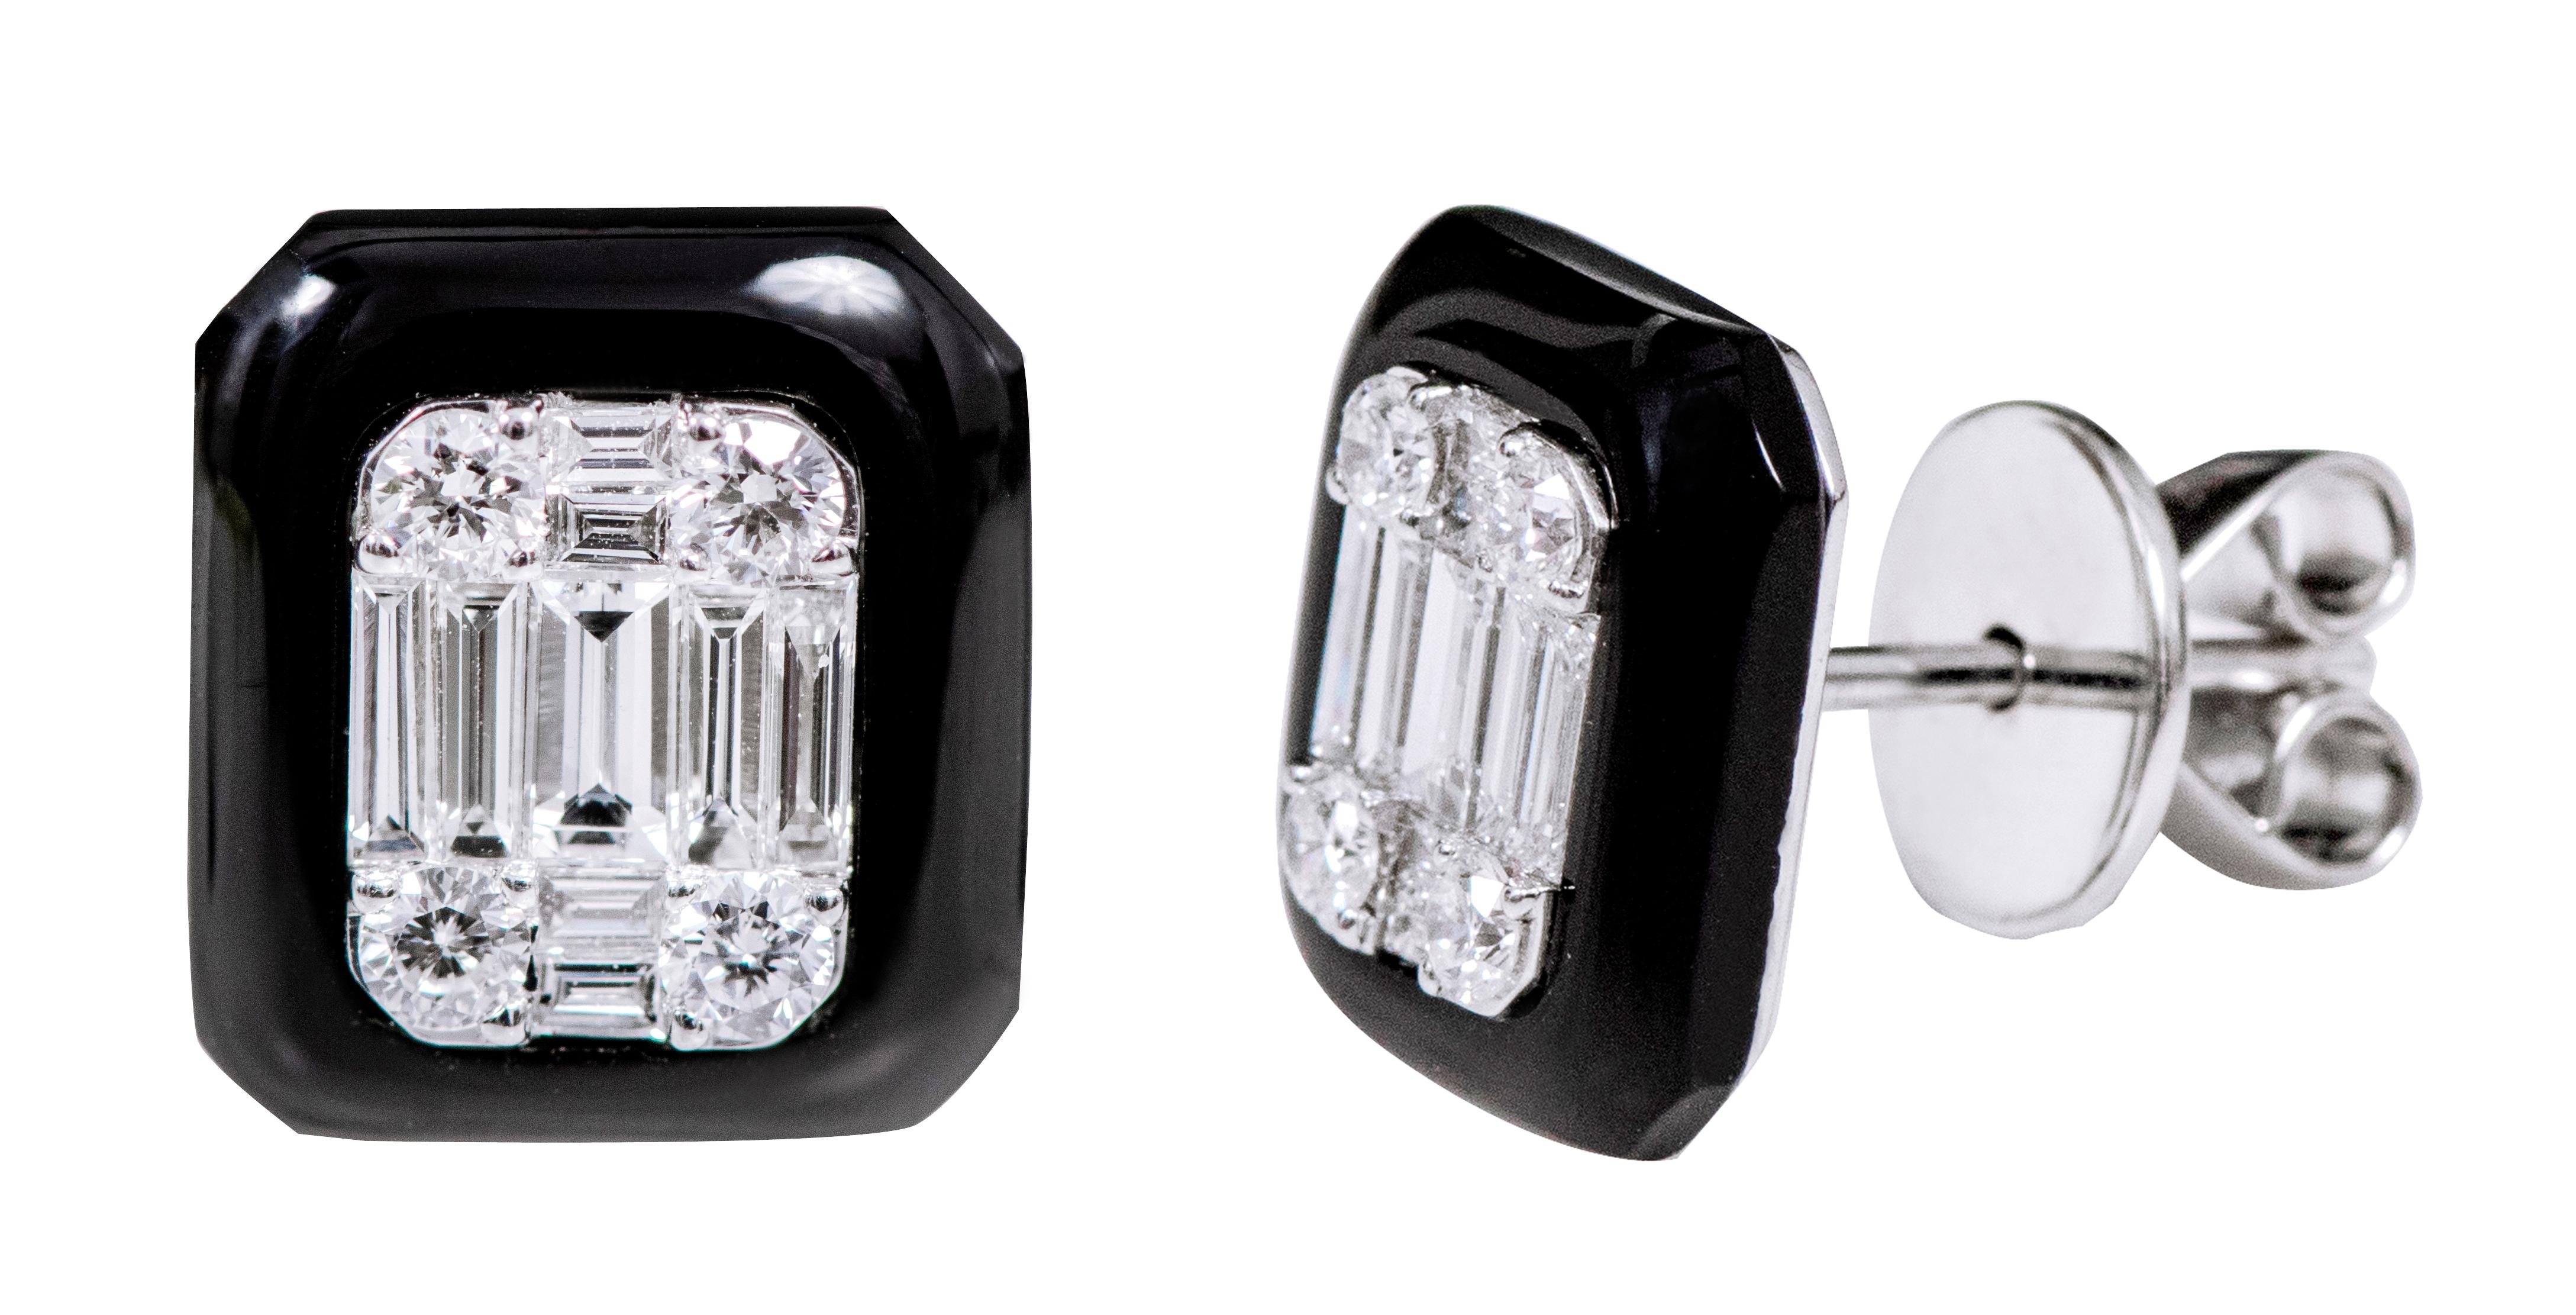 18 Karat White Gold 2.85 Carat Diamond and Black Onyx Stud Earrings

This contemporary invisible set emerald cut diamond and jet black onyx stud earring is impressive. The invisible diamond emerald cut in solid white gold is a crafty design wherein